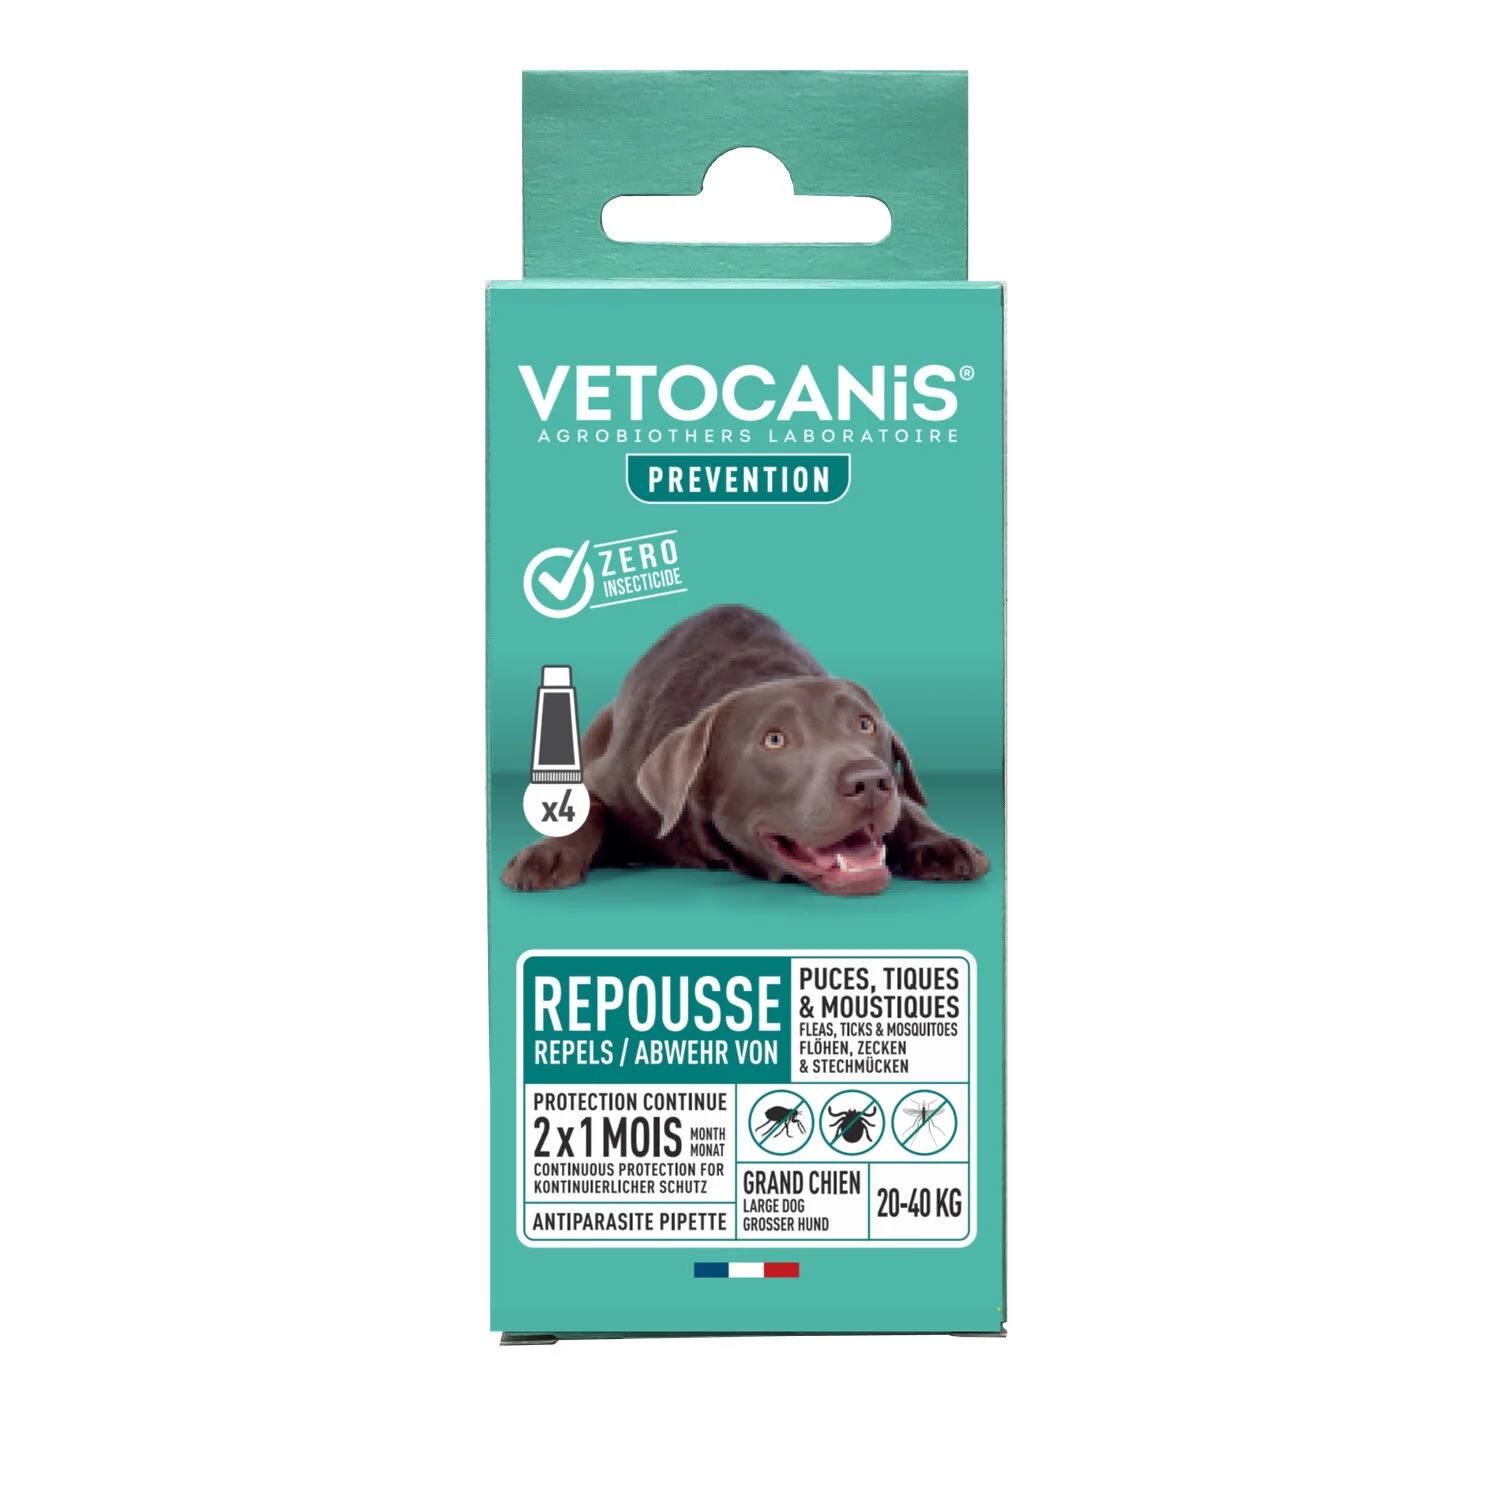 Antiparasitic Solution For Adult Dogs - Vetocanis